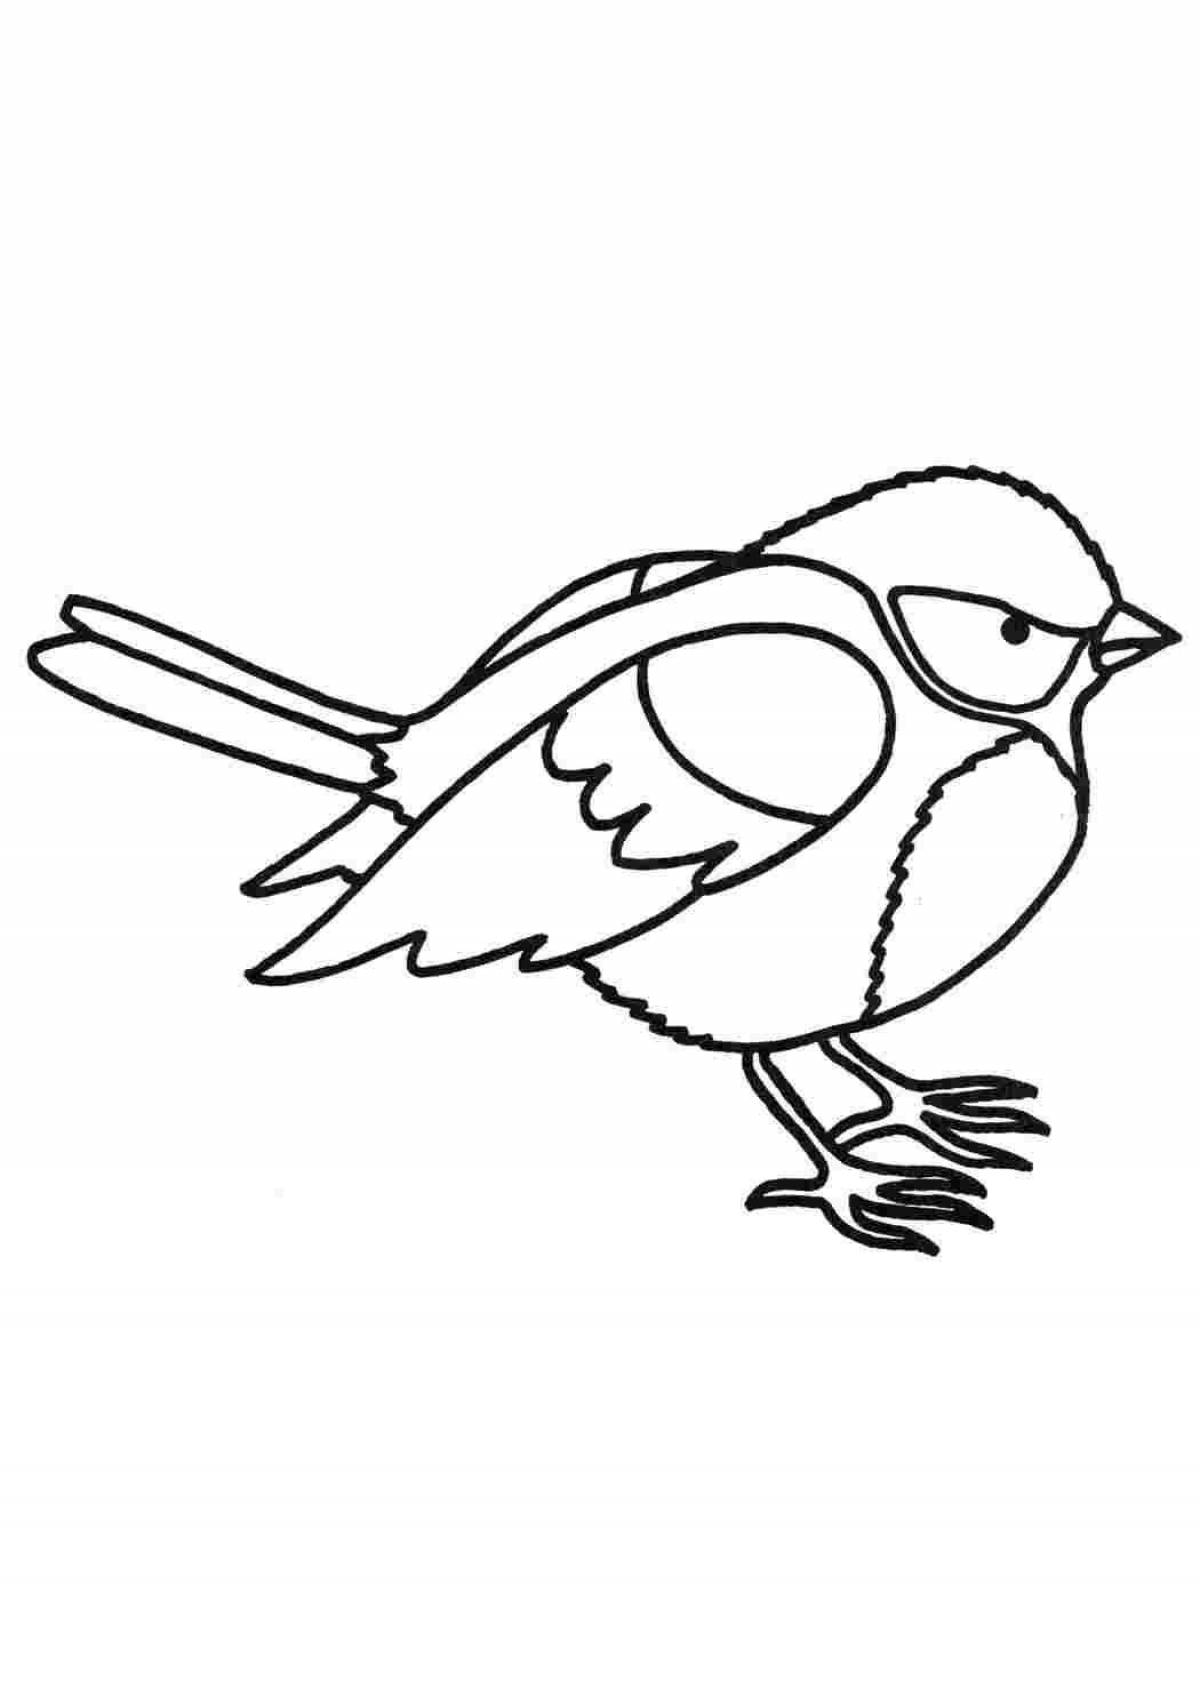 Animated tit coloring page